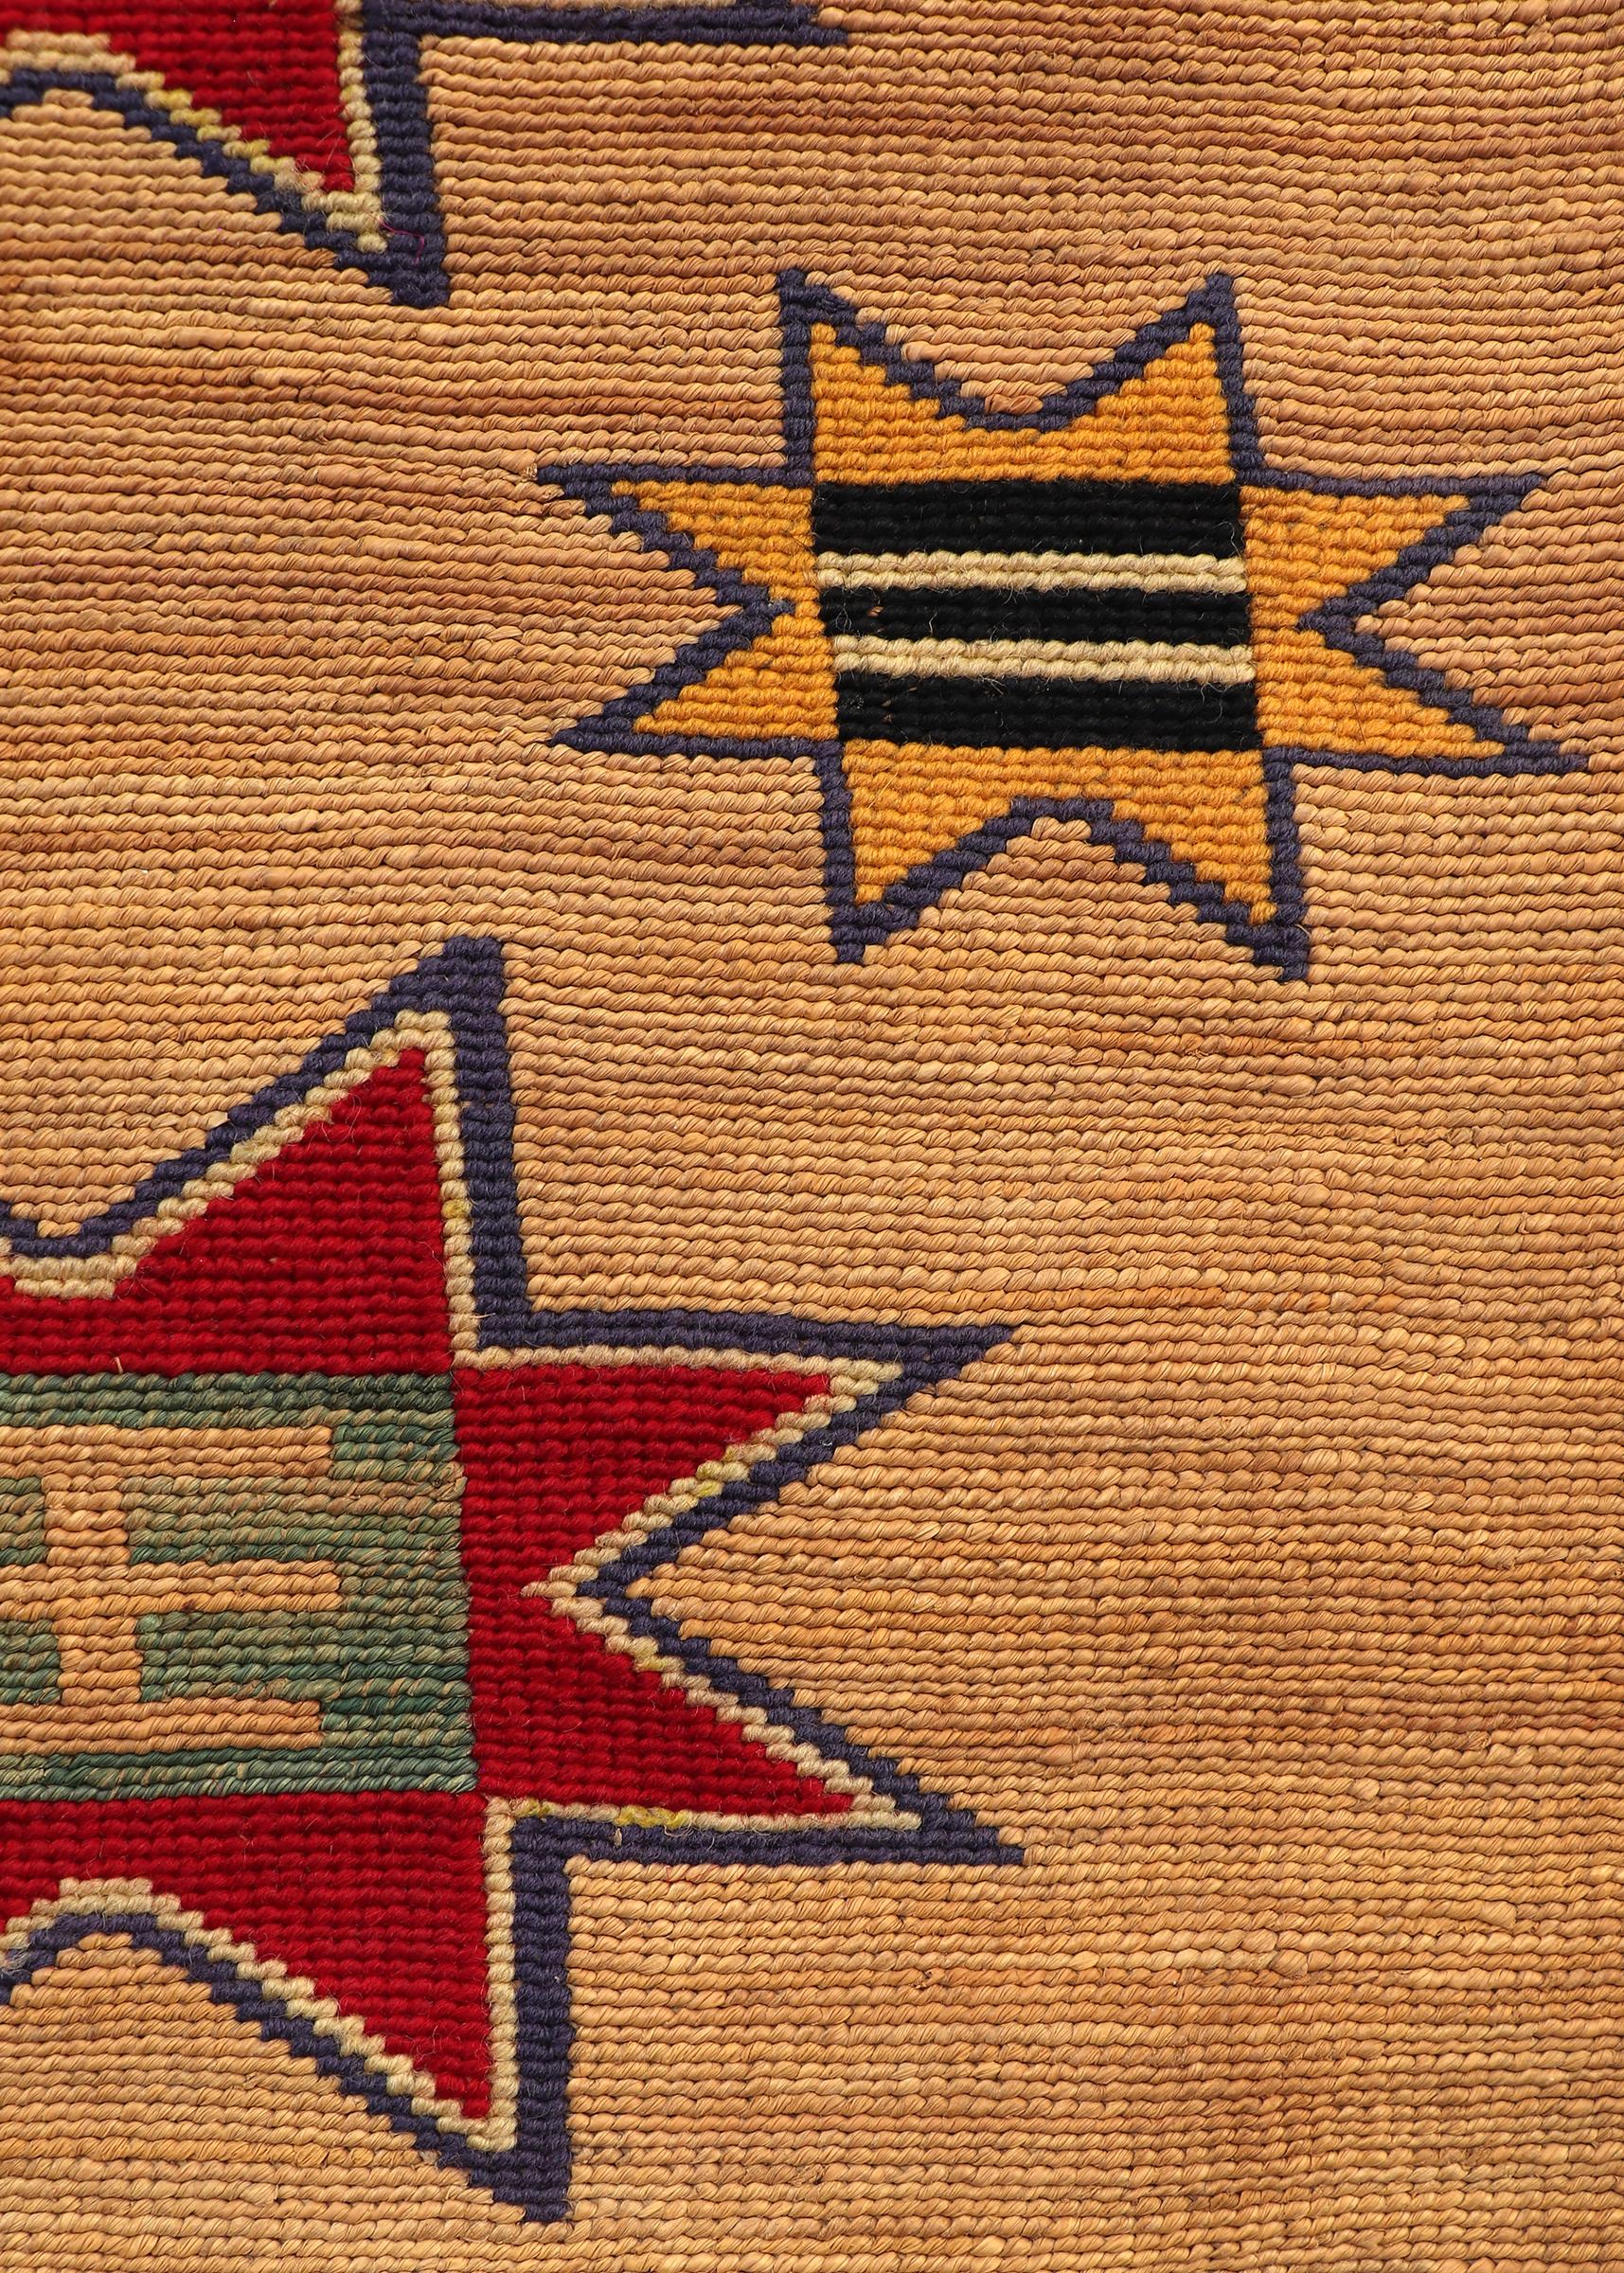 American 1890s Plateau Cornhusk Bag with Blue, Red, and Yellow Geometric Designs